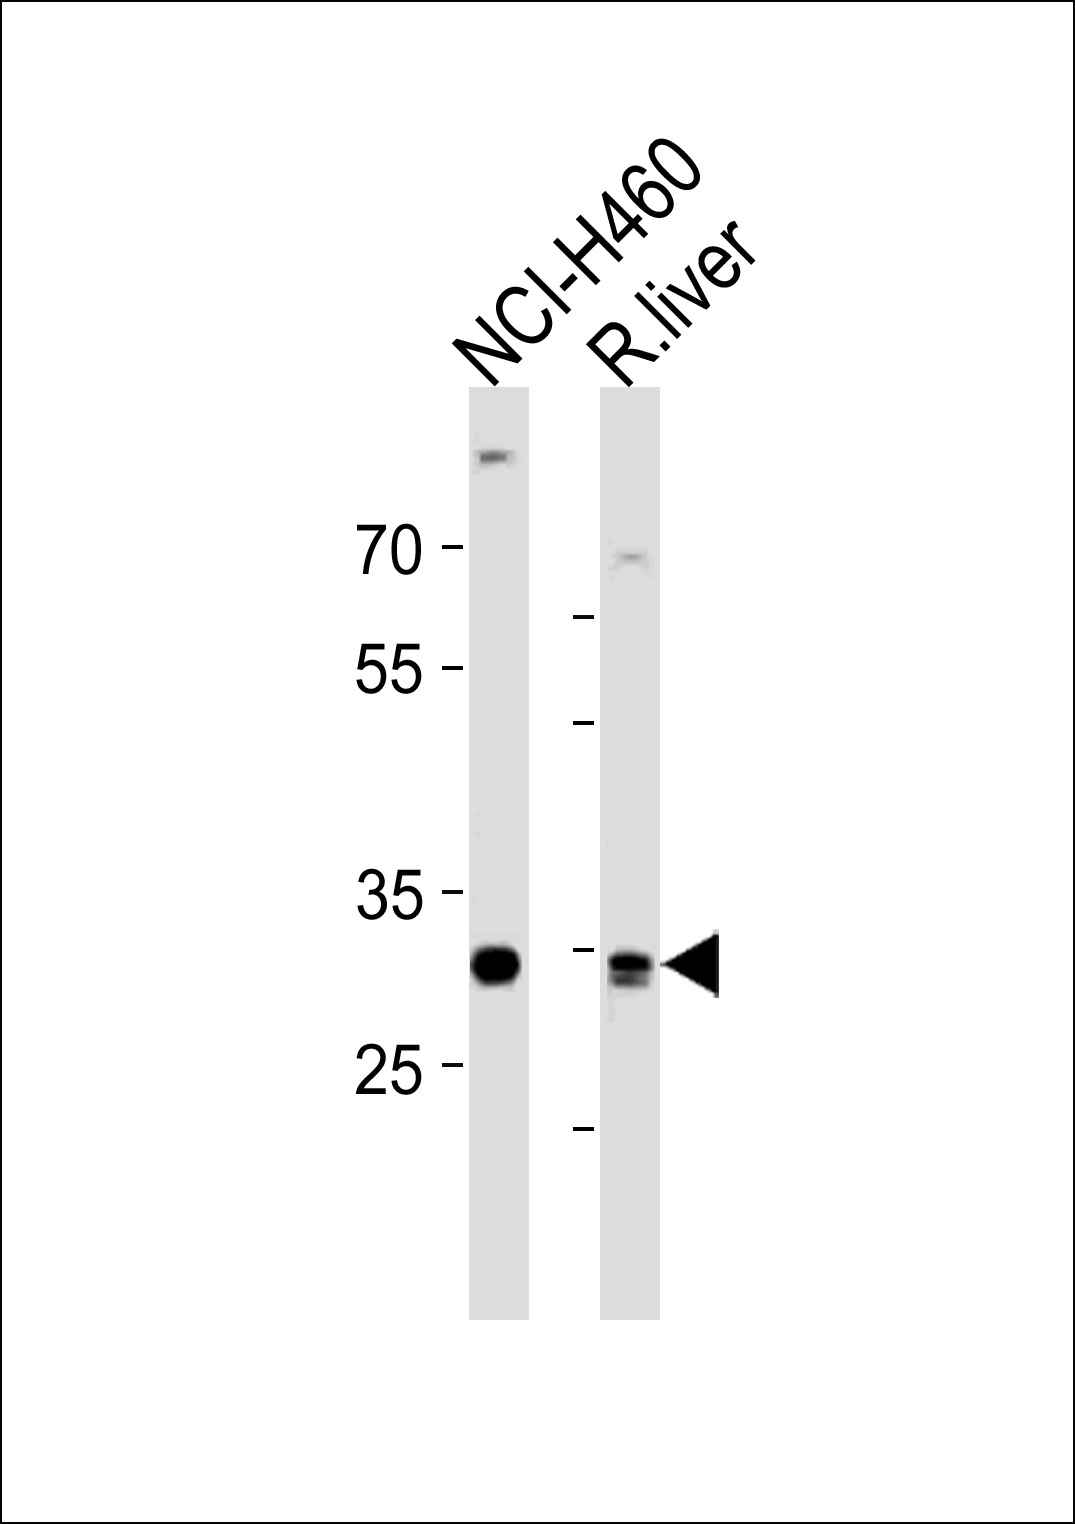 CALB1 Antibody (Center) (Cat. #AP20497c) western blot analysis in NCI-H460 cell line and rat liver tissue lysates (35ug/lane).This demonstrates the CALB1 antibody detected the CALB1 protein (arrow).